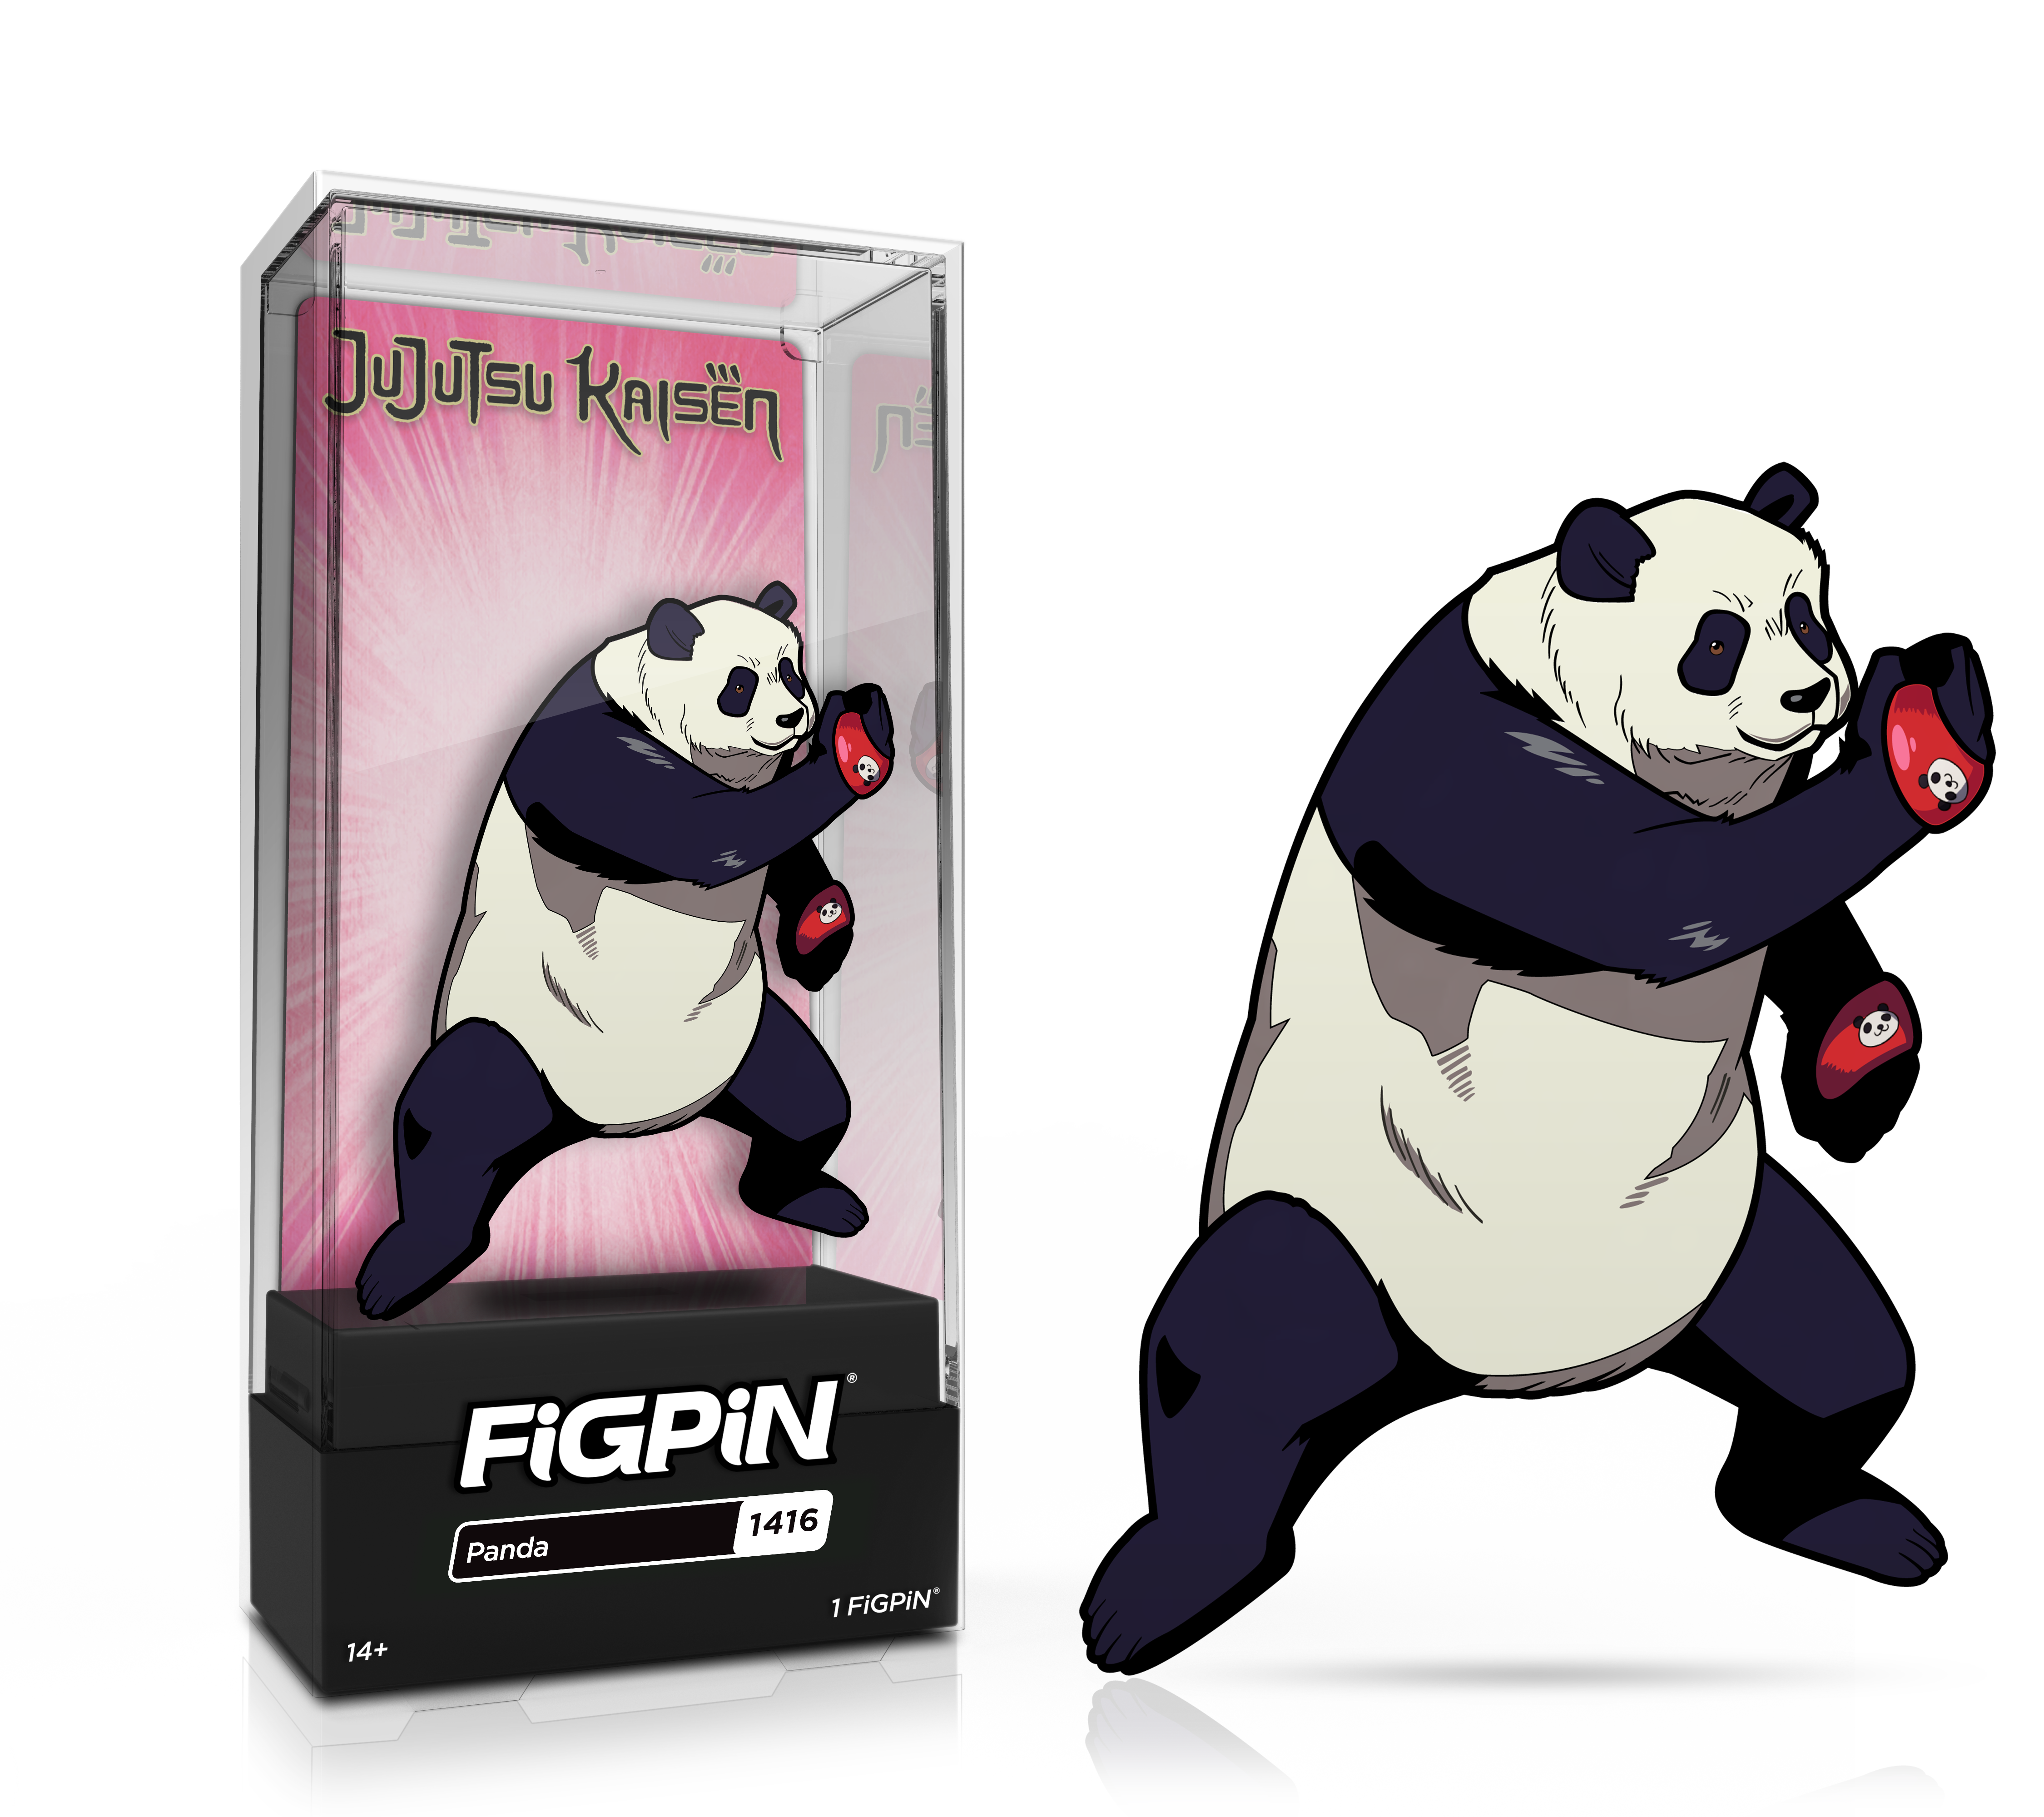 Side by side view of the Panda enamel pin in display case and the art render.